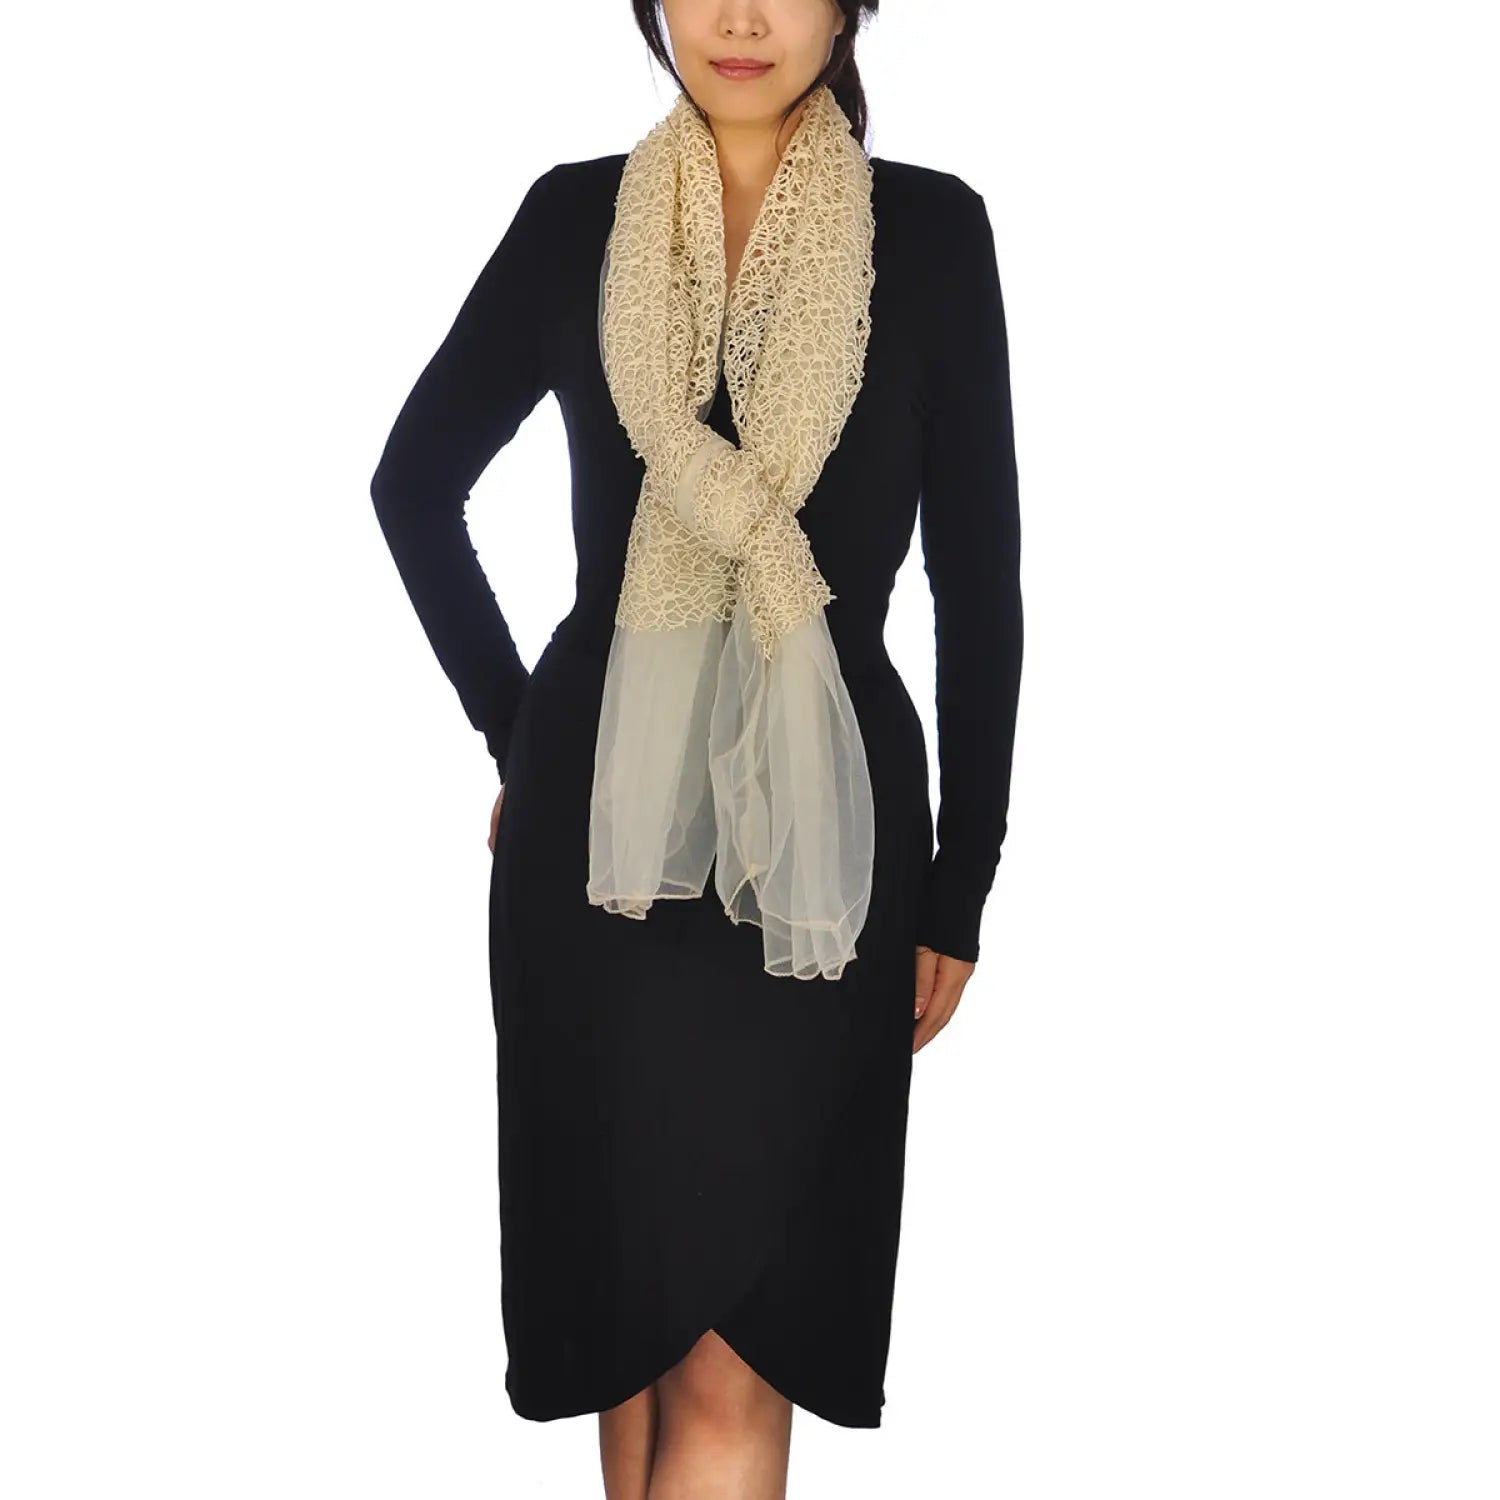 Woman in black dress and chiffon cowl neck scarf with rope detailing.